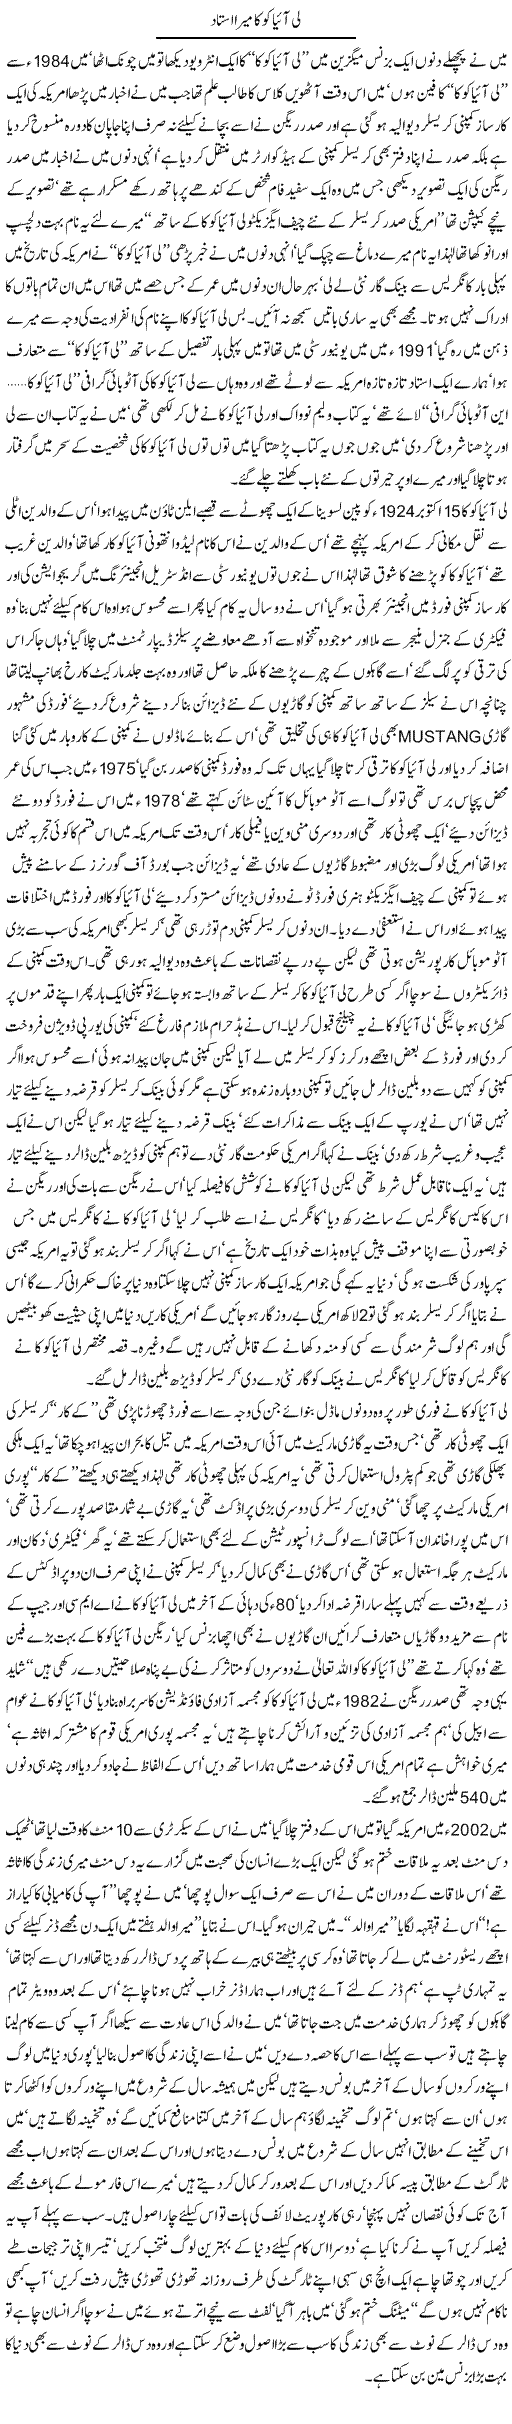 Lee Iacocca Mera Ustaad by Javed Chaudhry